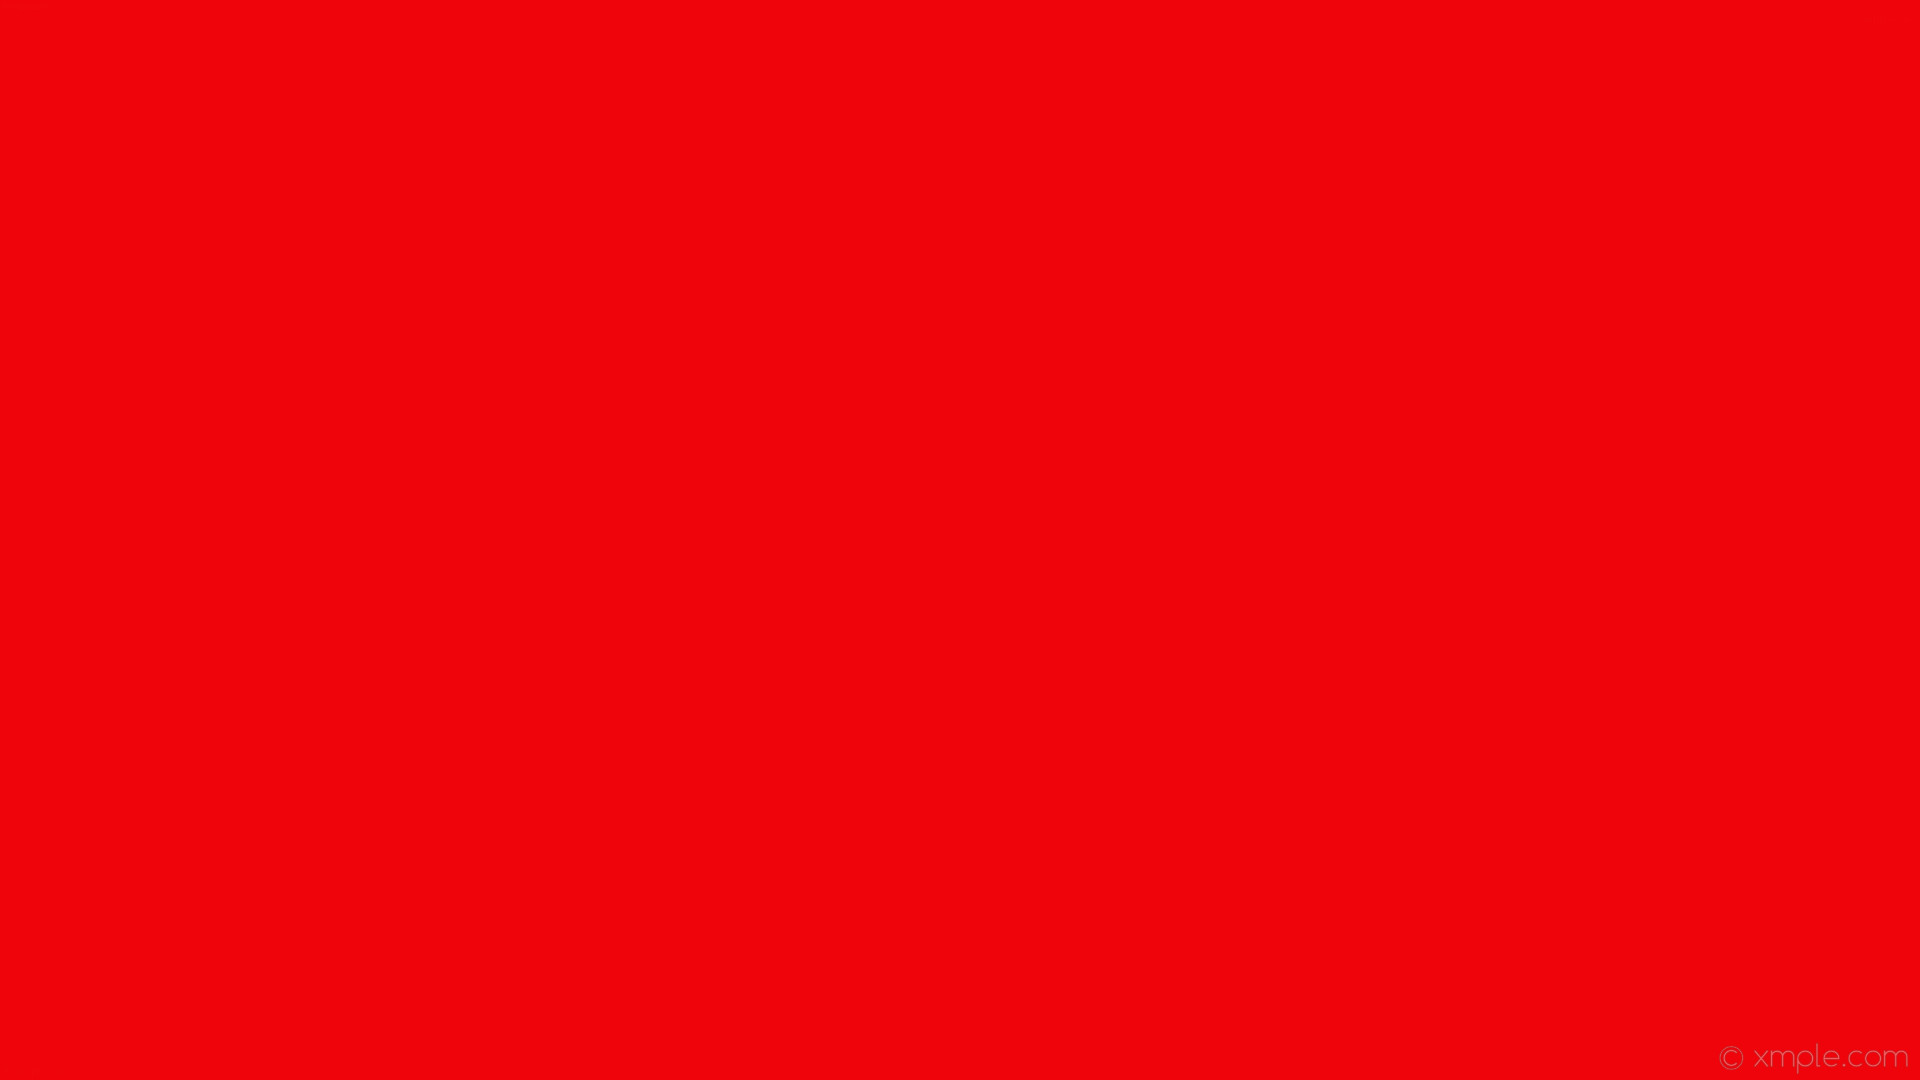 Blood red  660000   plain background image